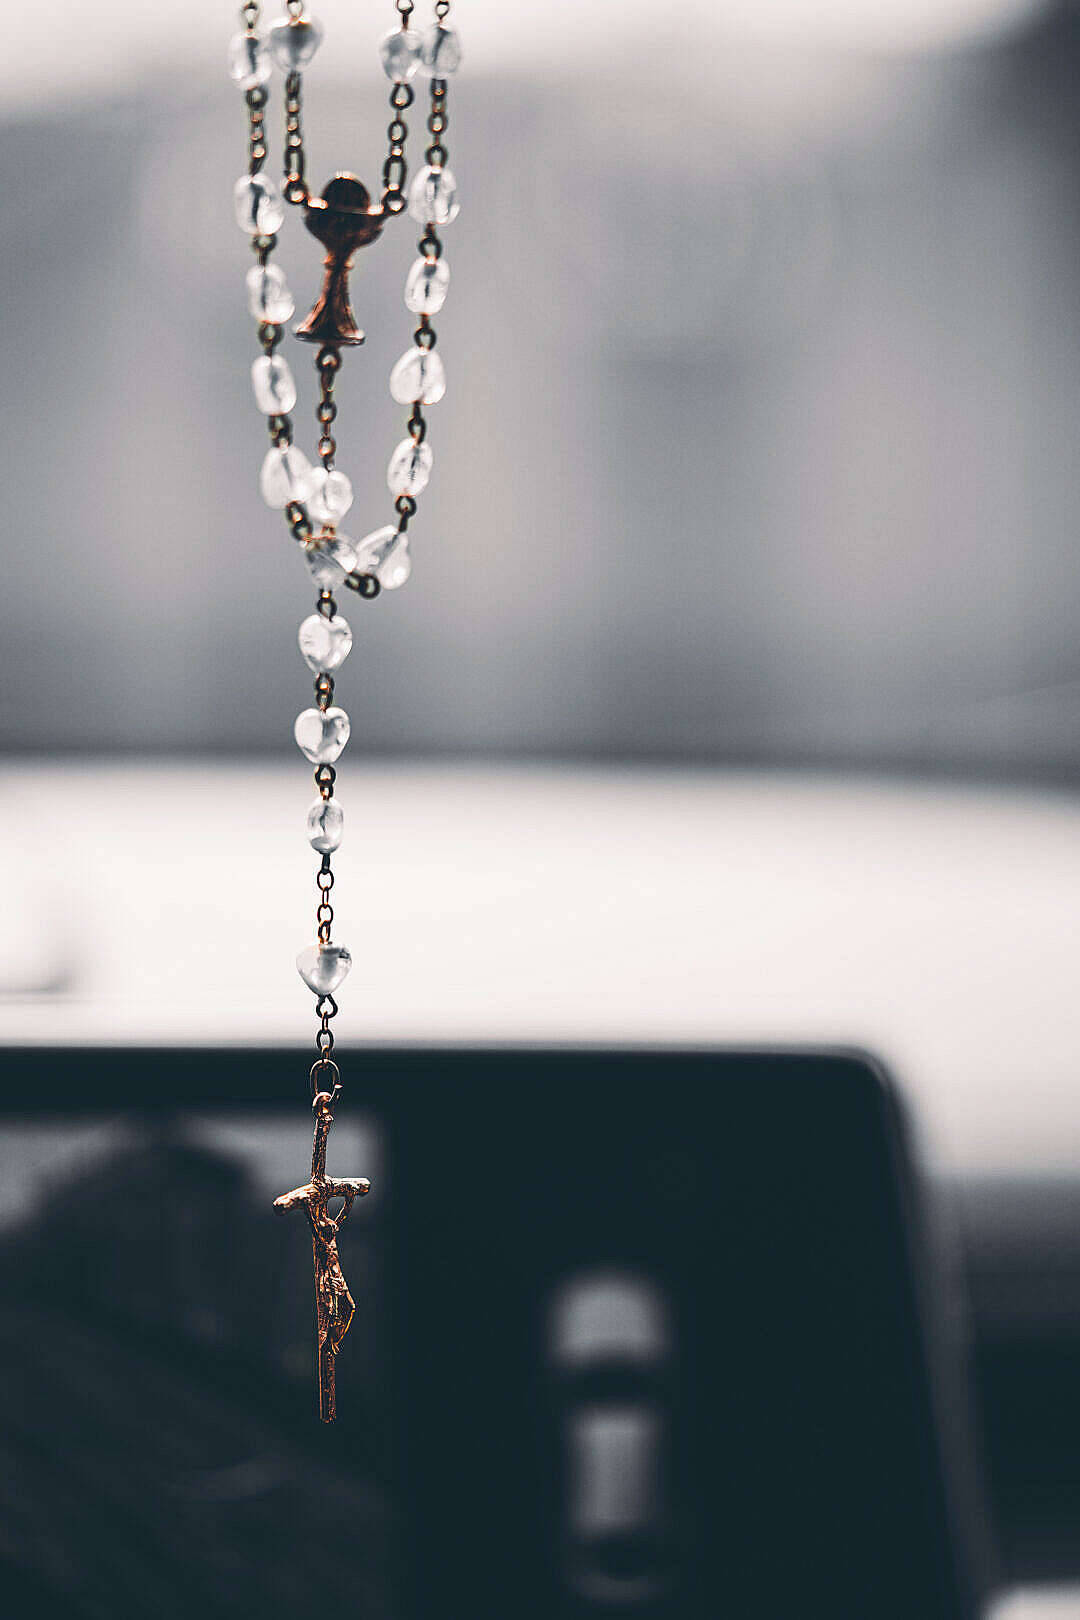 Hanging Rosary With Jesus On Cross